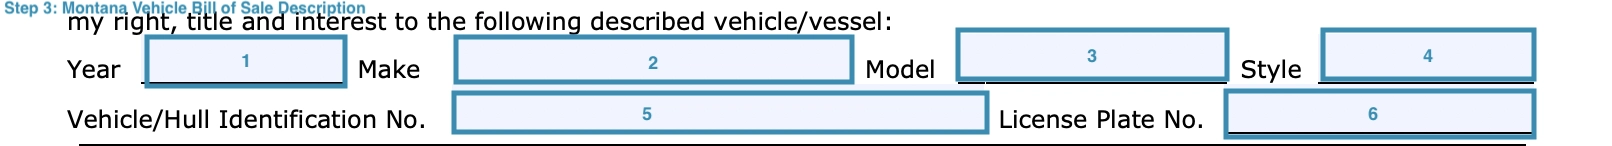 step 3 to filling out a montana vehicle bill of sale example description